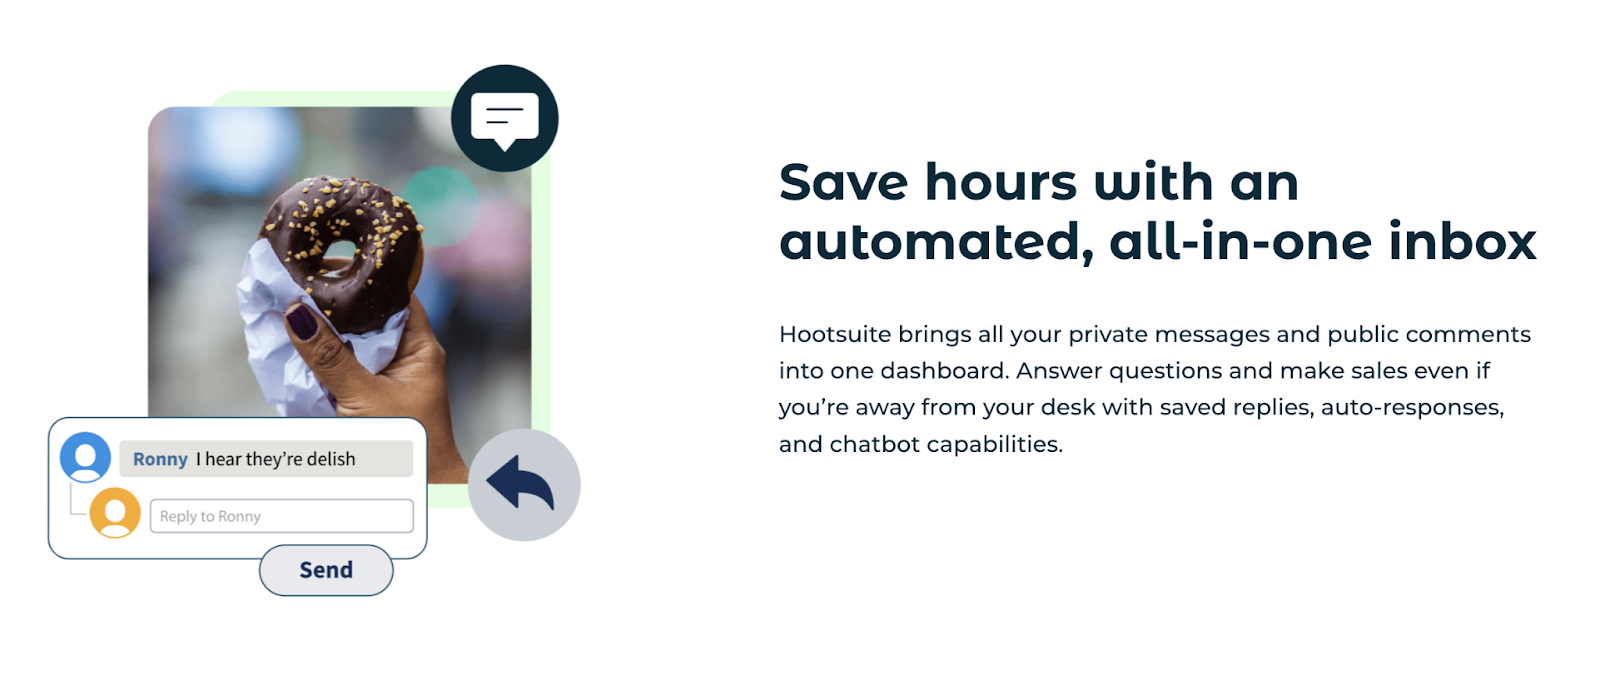 "Save hours with an automated, all-in-one inbox" Hootsuite